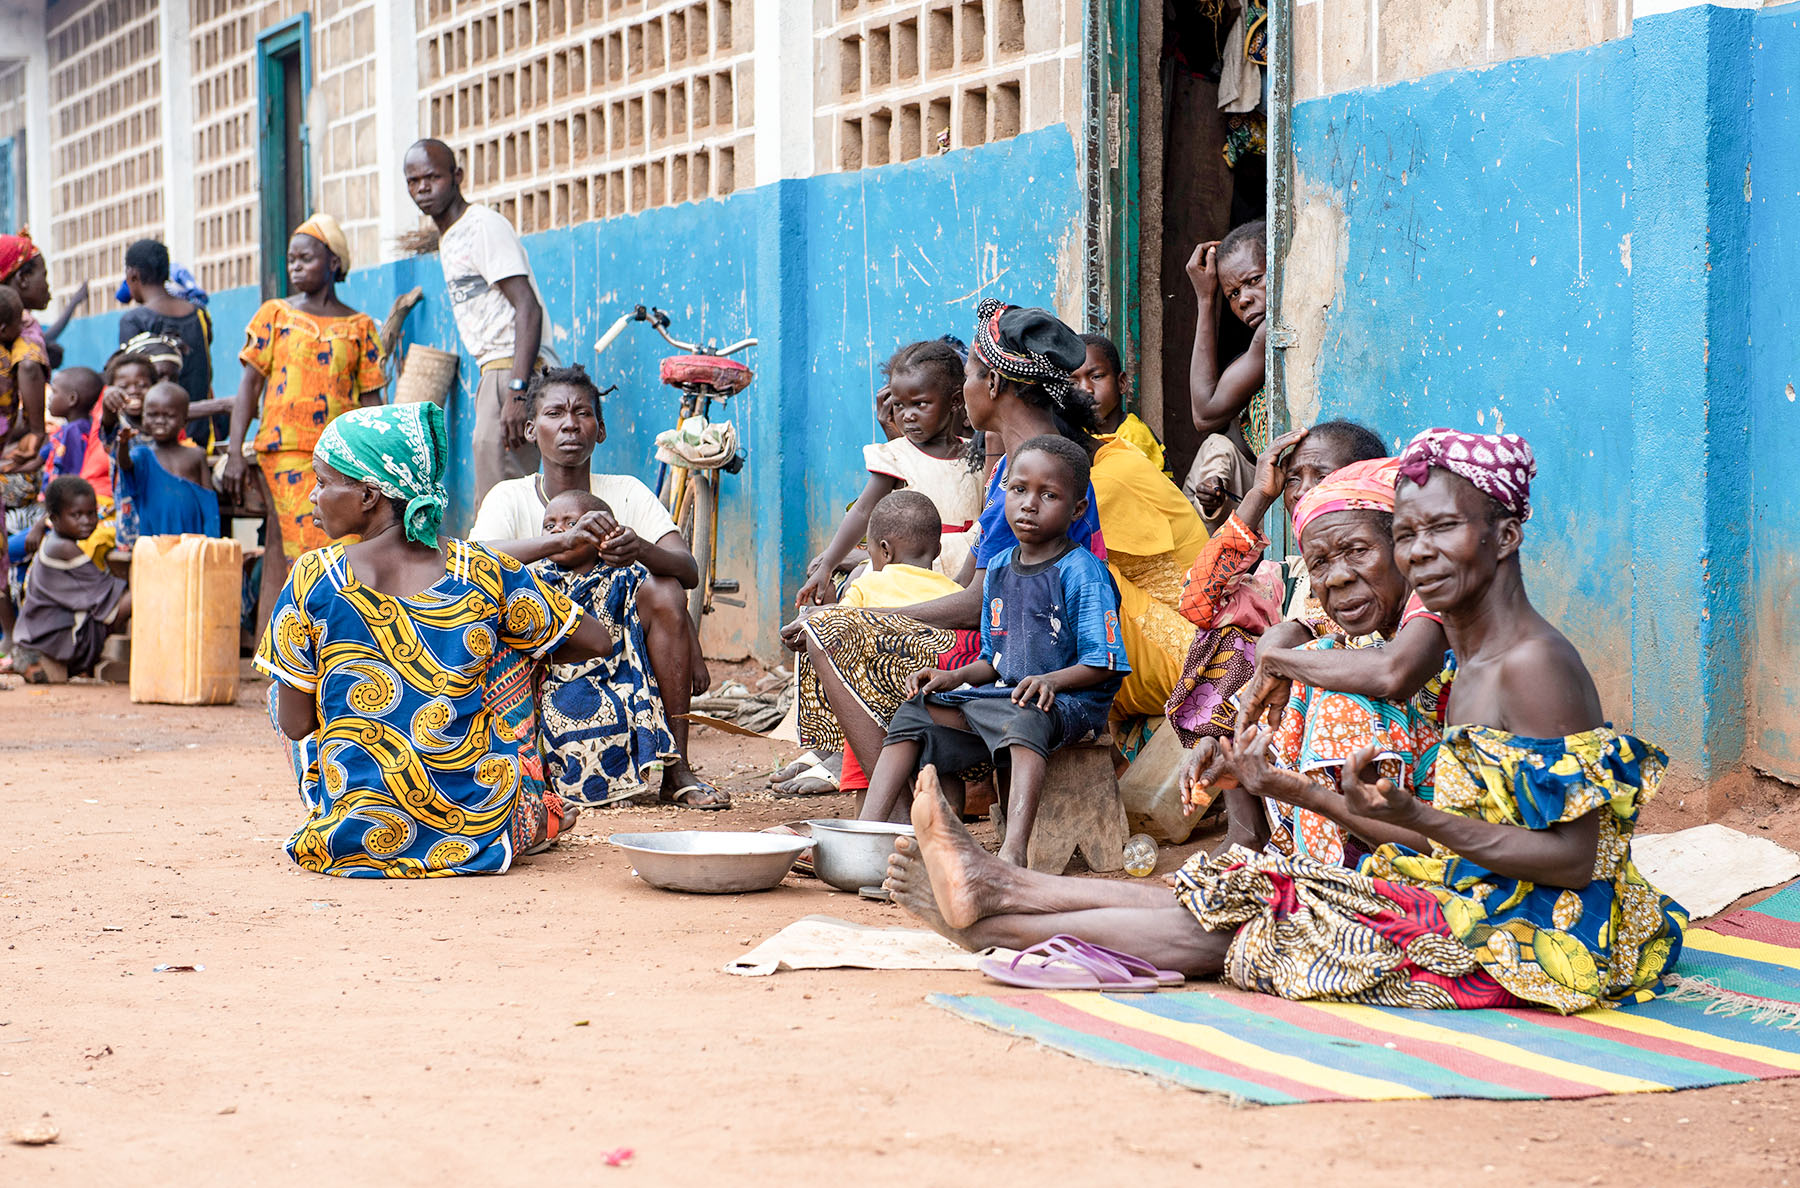 Recently displaced Christians sit in the courtyard of the Kaga Bandoro school. Three days earlier, they fled a 4 a.m. Islamist attack on their village with only the clothes they were wearing.